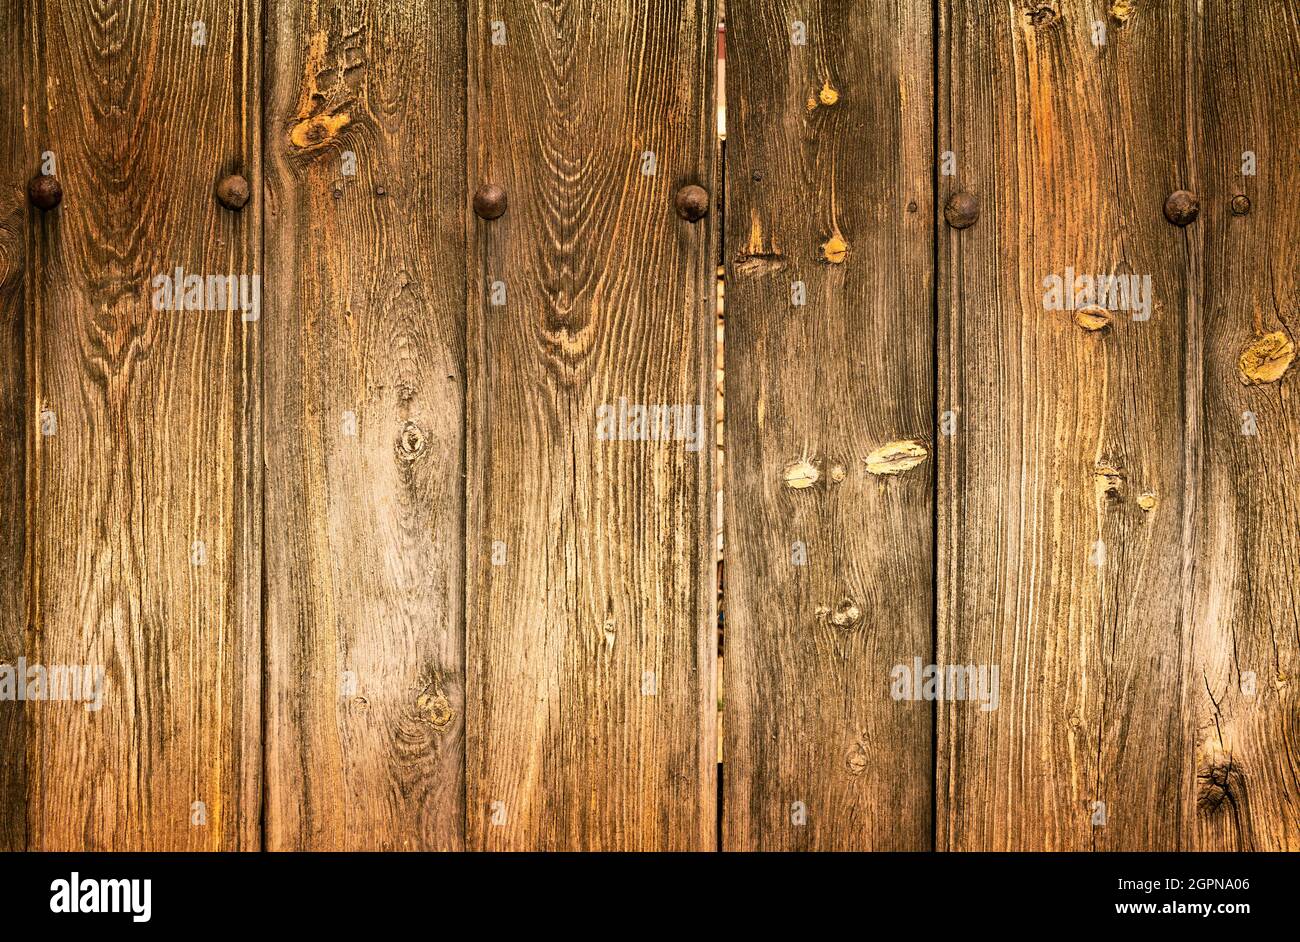 Detail of old wooden door in brown tones with a lot of texture and rusty iron nails, with copy space at the bottom. Stock Photo